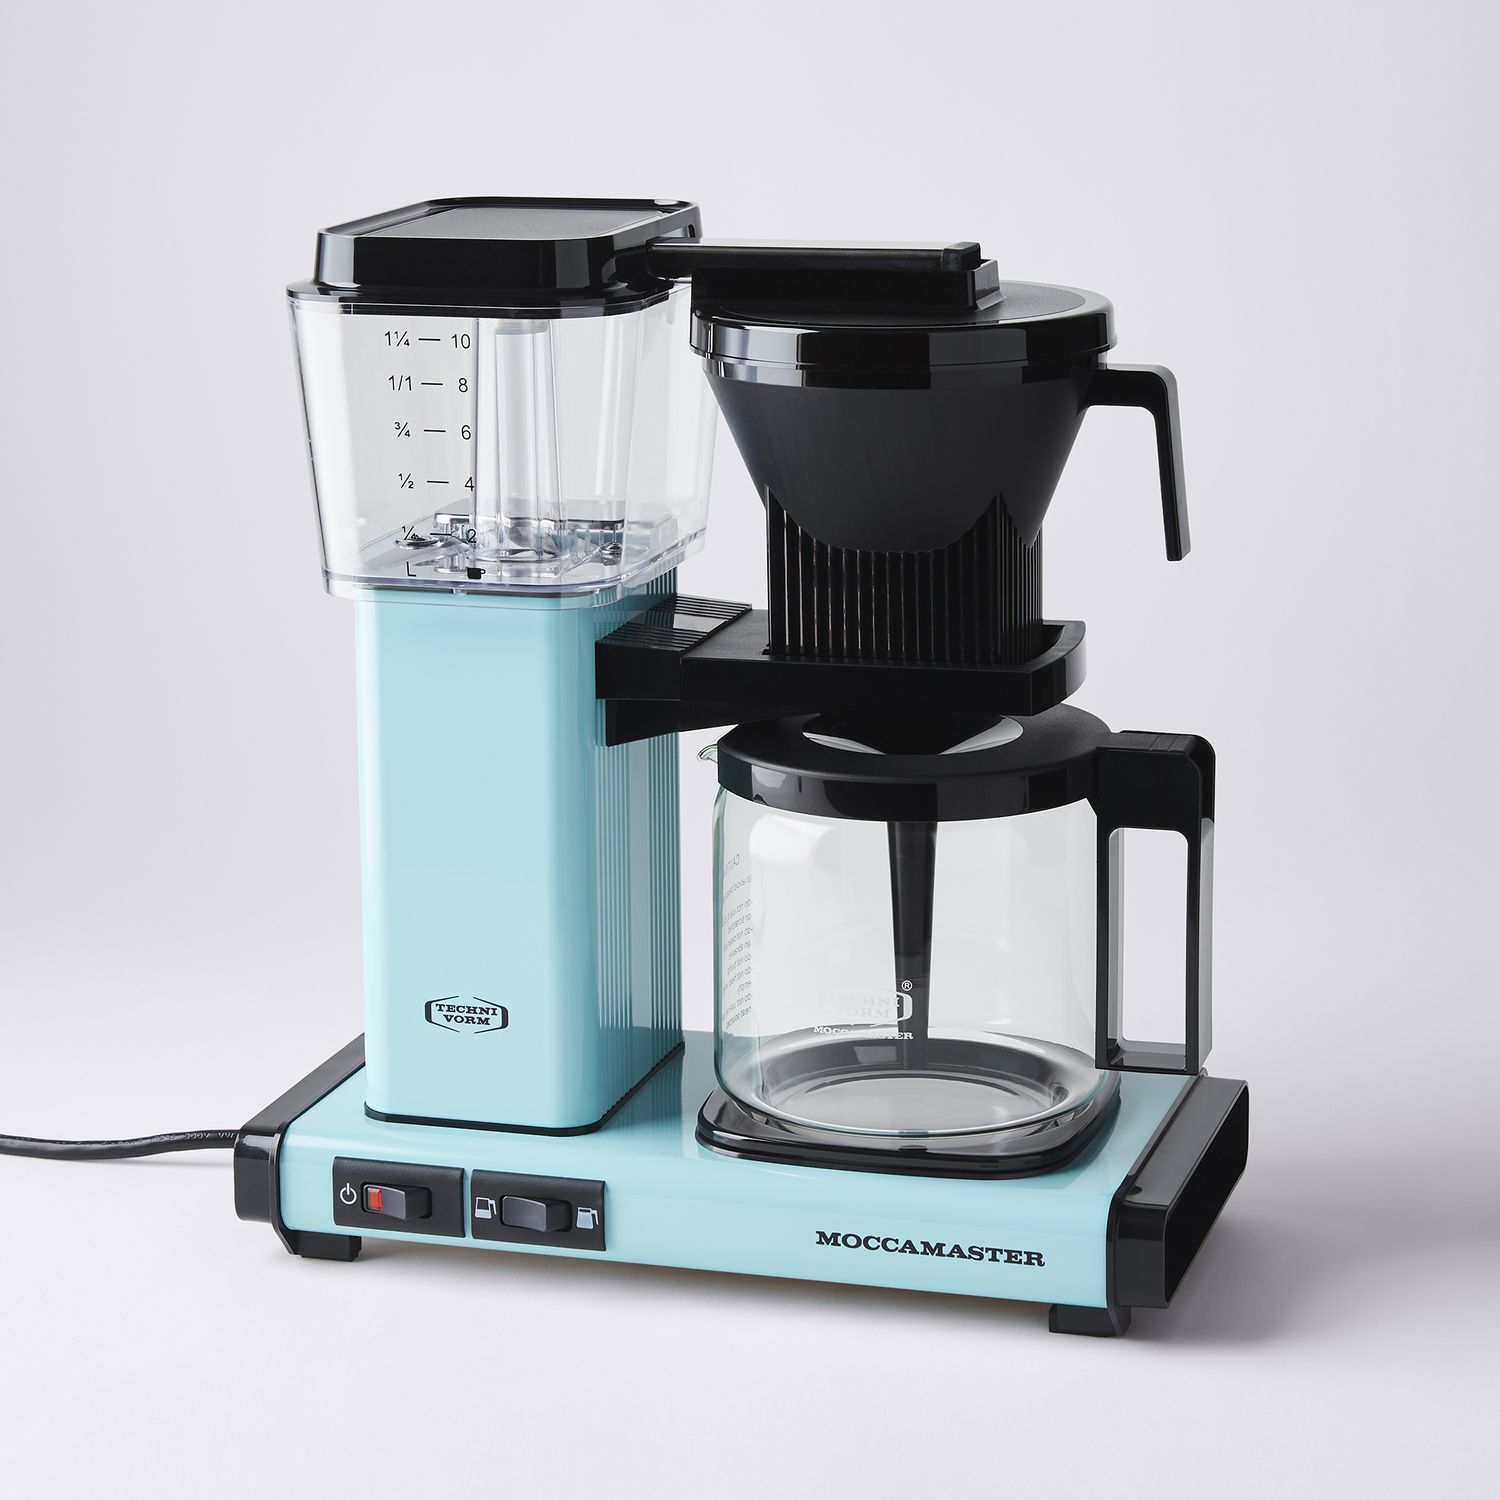 Technivorm Moccamaster 10-Cup Coffee Maker with Glass Carafe on Food52